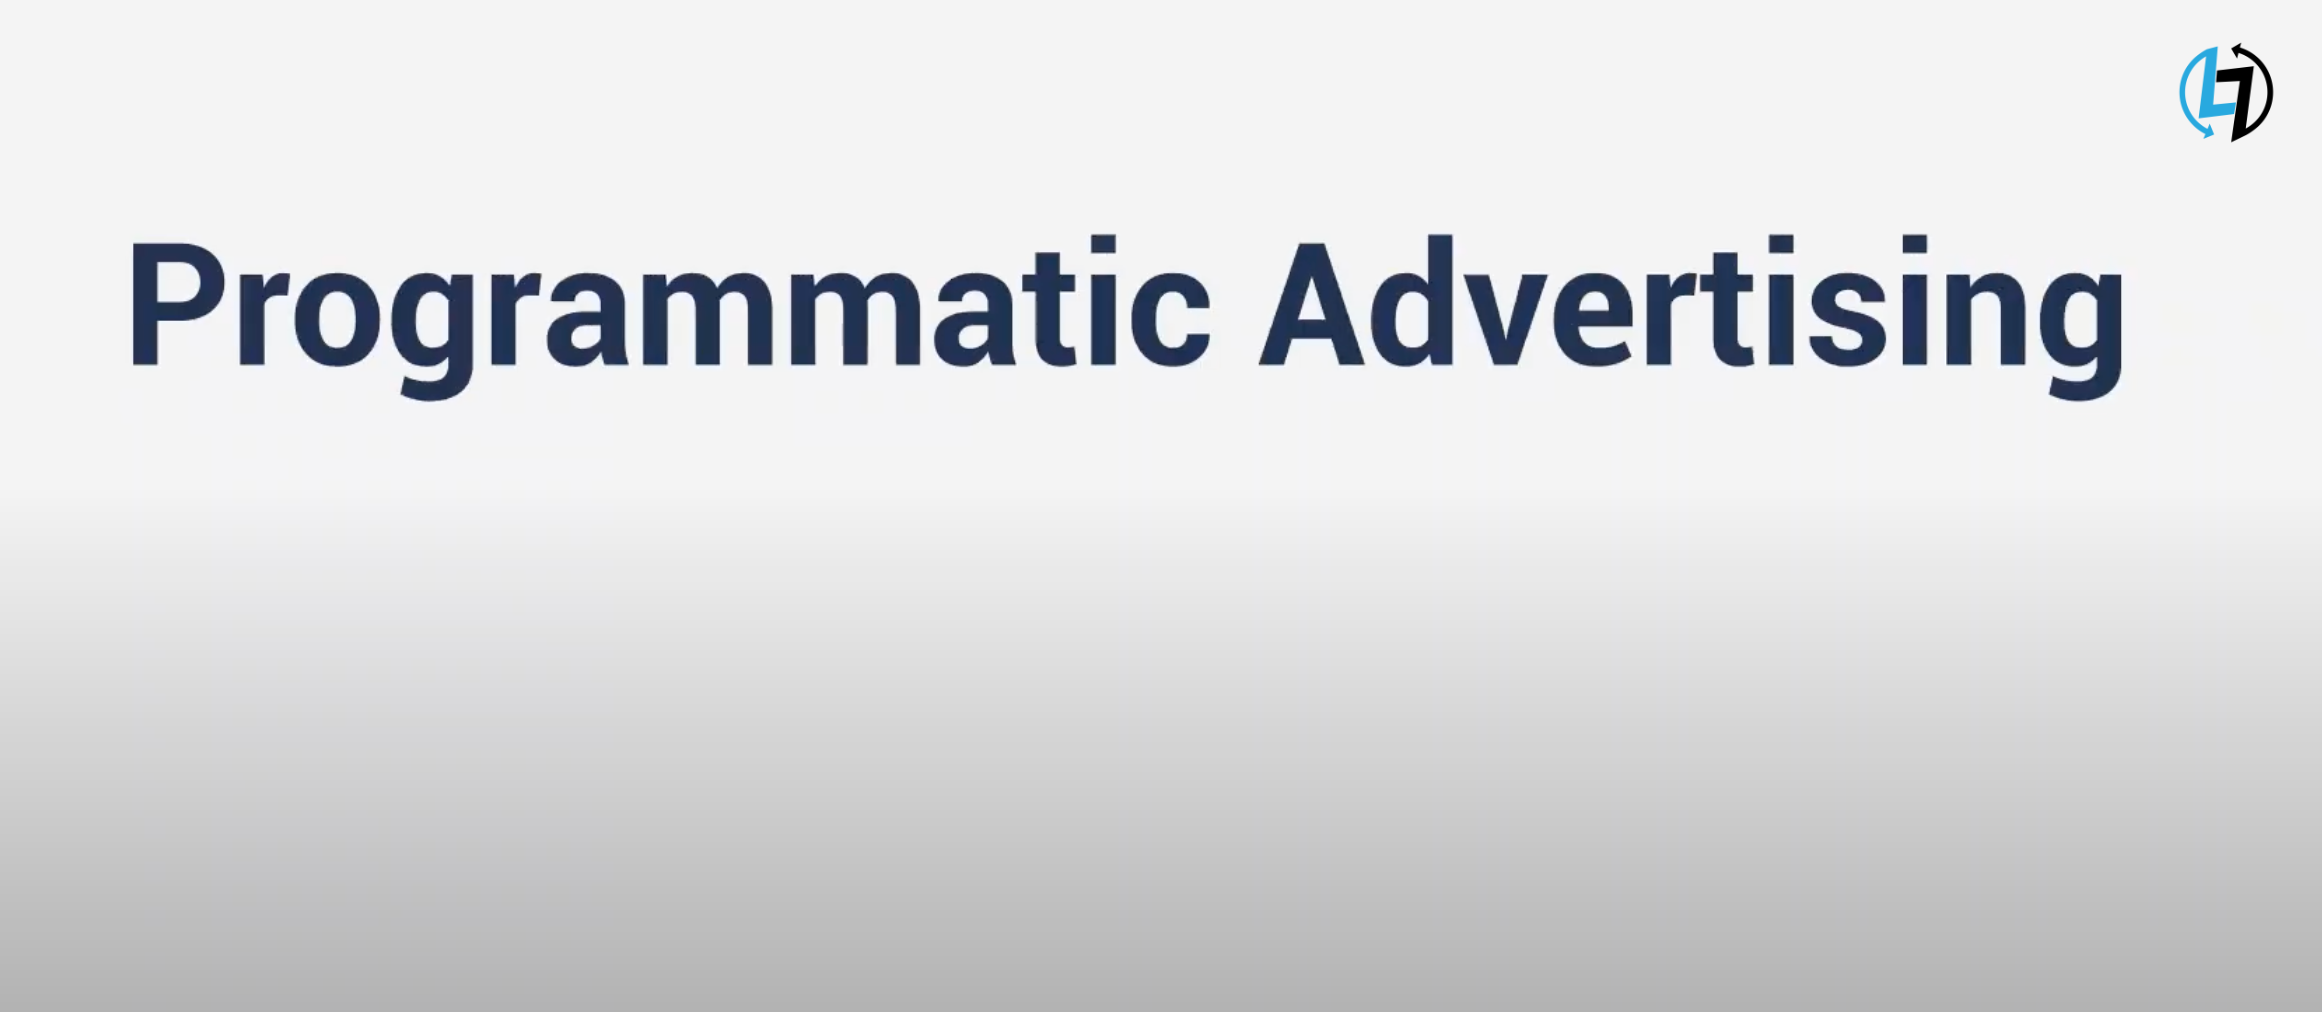 What is Programmatic Advertising? How does Programmatic Advertising work?